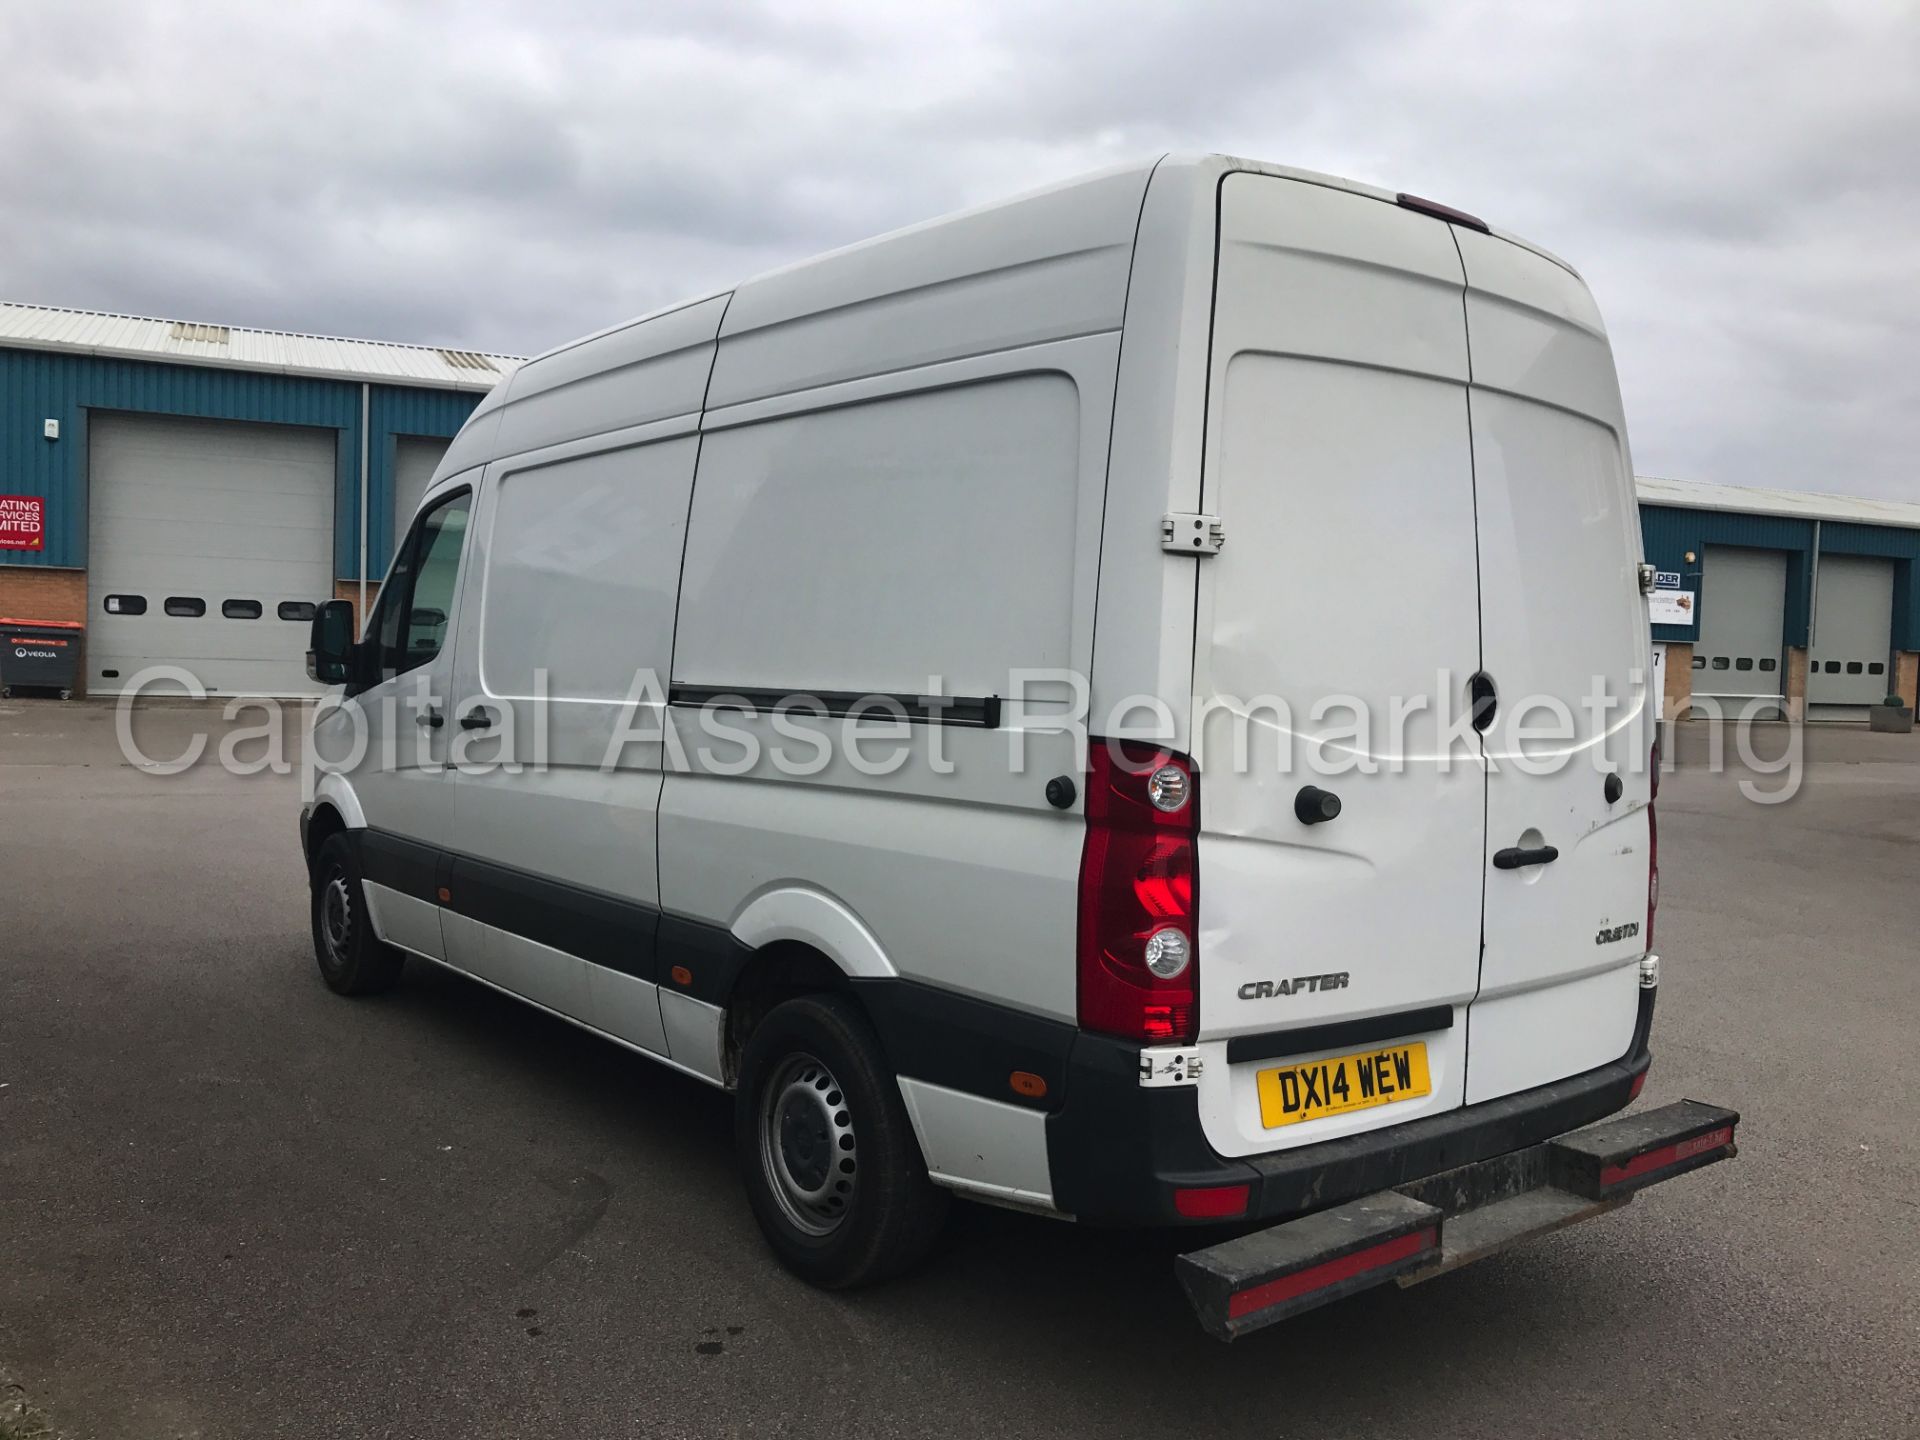 VOLKSWAGEN CRAFTER CR35 'MWB HI-ROOF' (2014) '2.0 TDI - 109 PS - 6 SPEED' *1 COMPANY OWNER FROM NEW* - Image 4 of 19